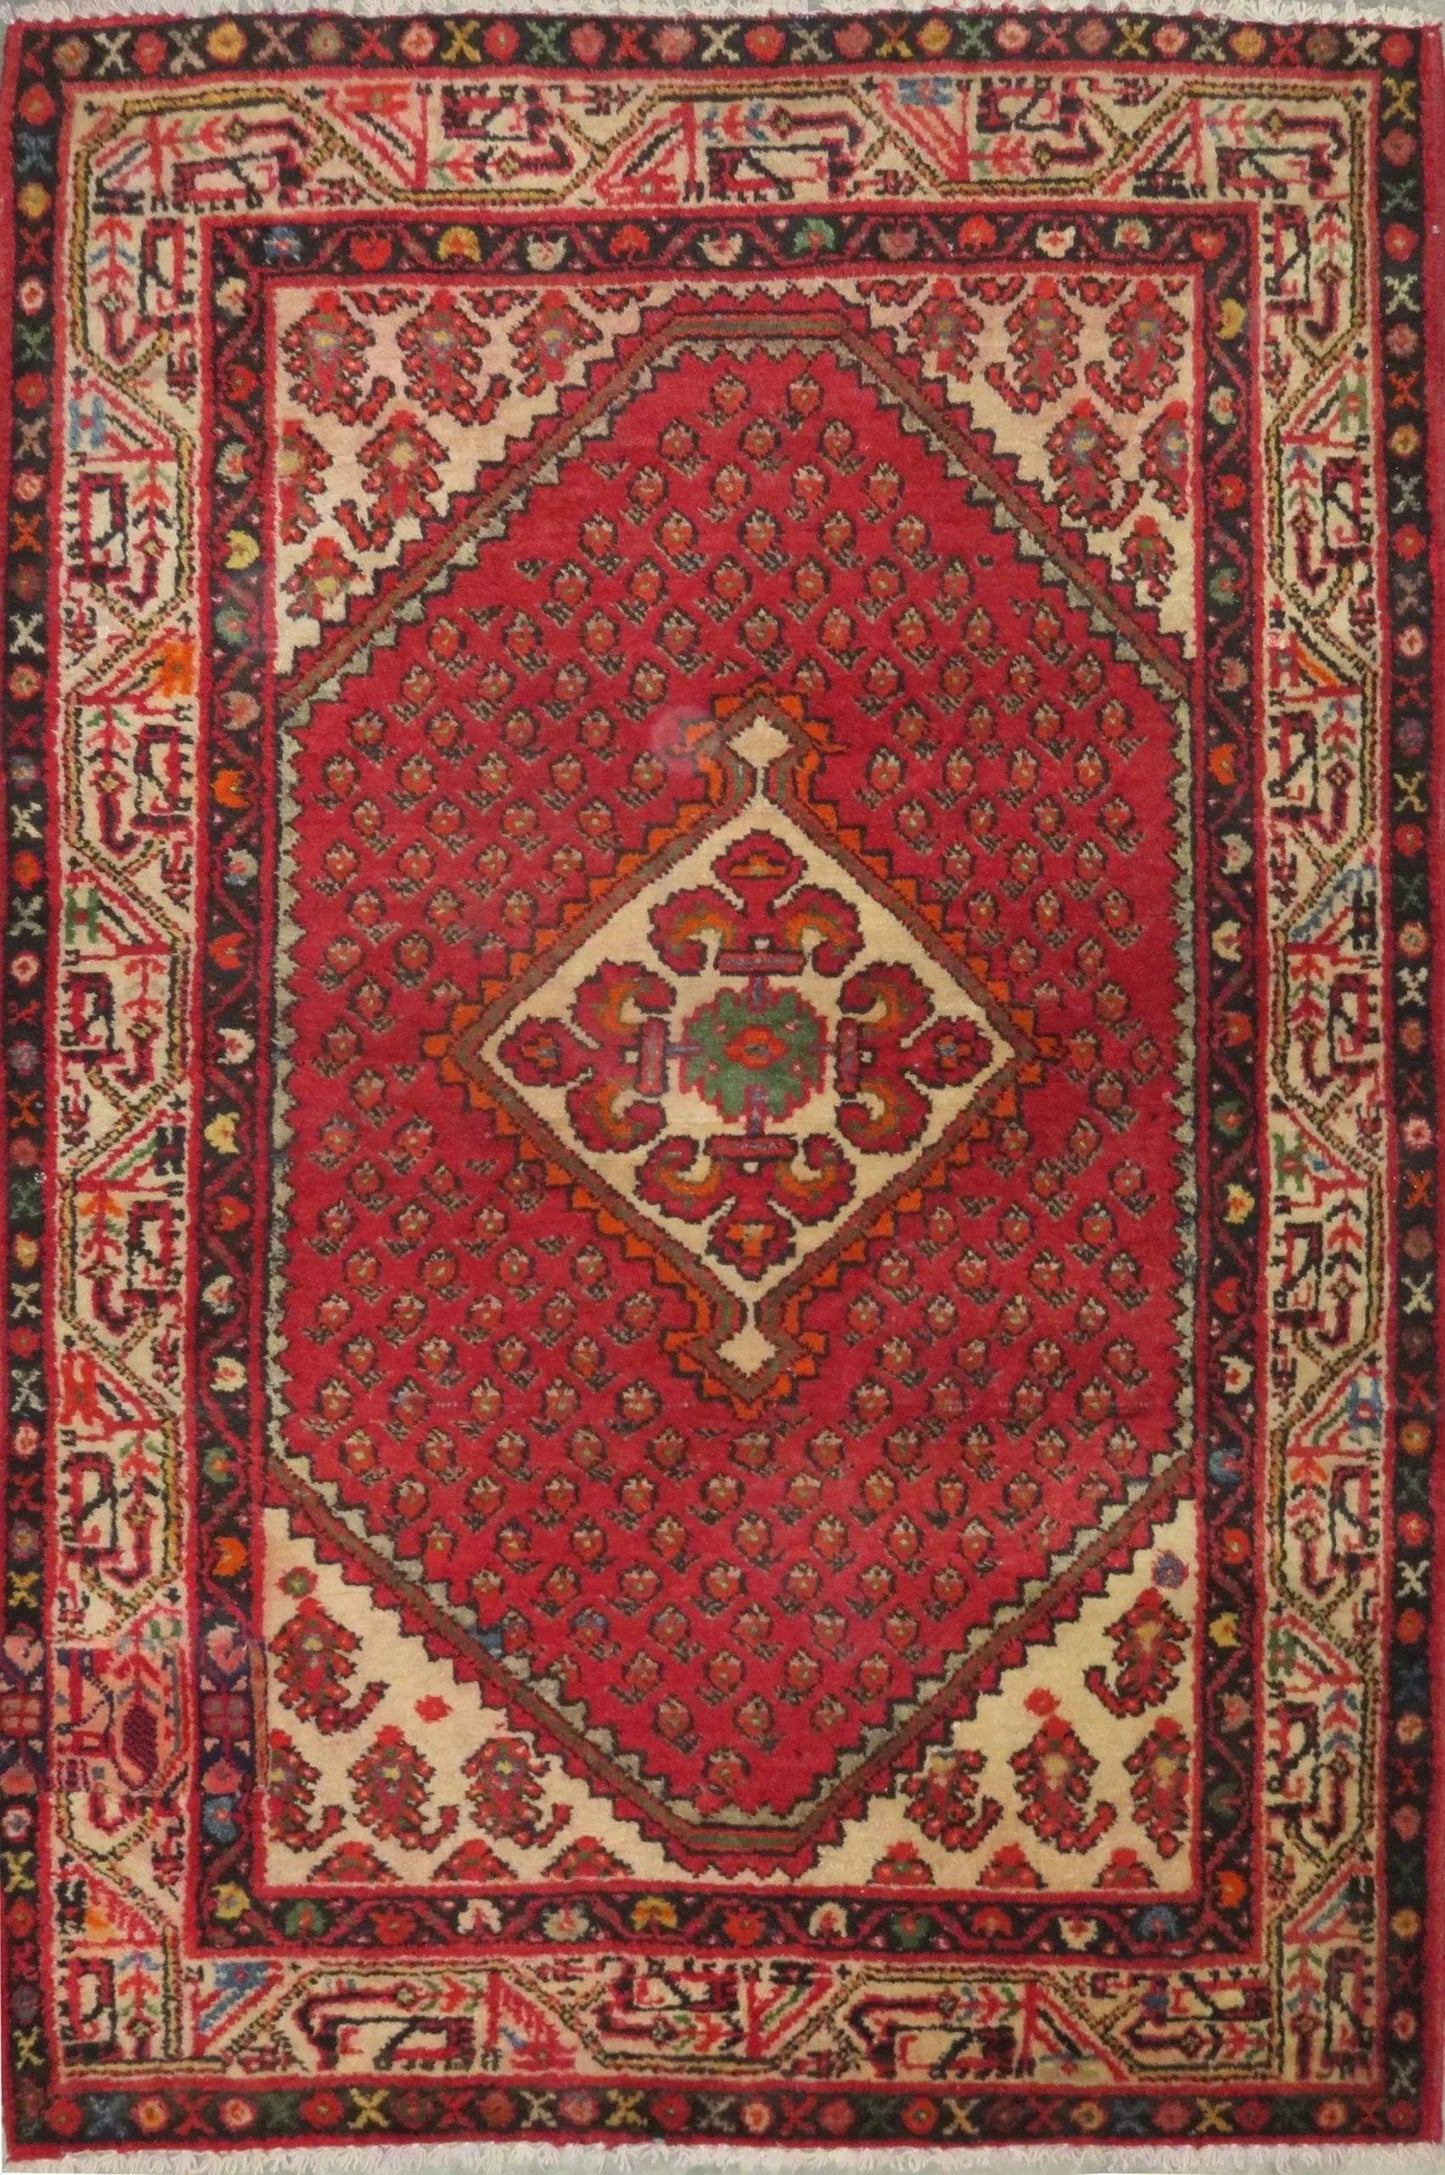 Hand-Knotted Persian Wool Rug _ Luxurious Vintage Design, 5'1" x 3'4", Artisan Crafted